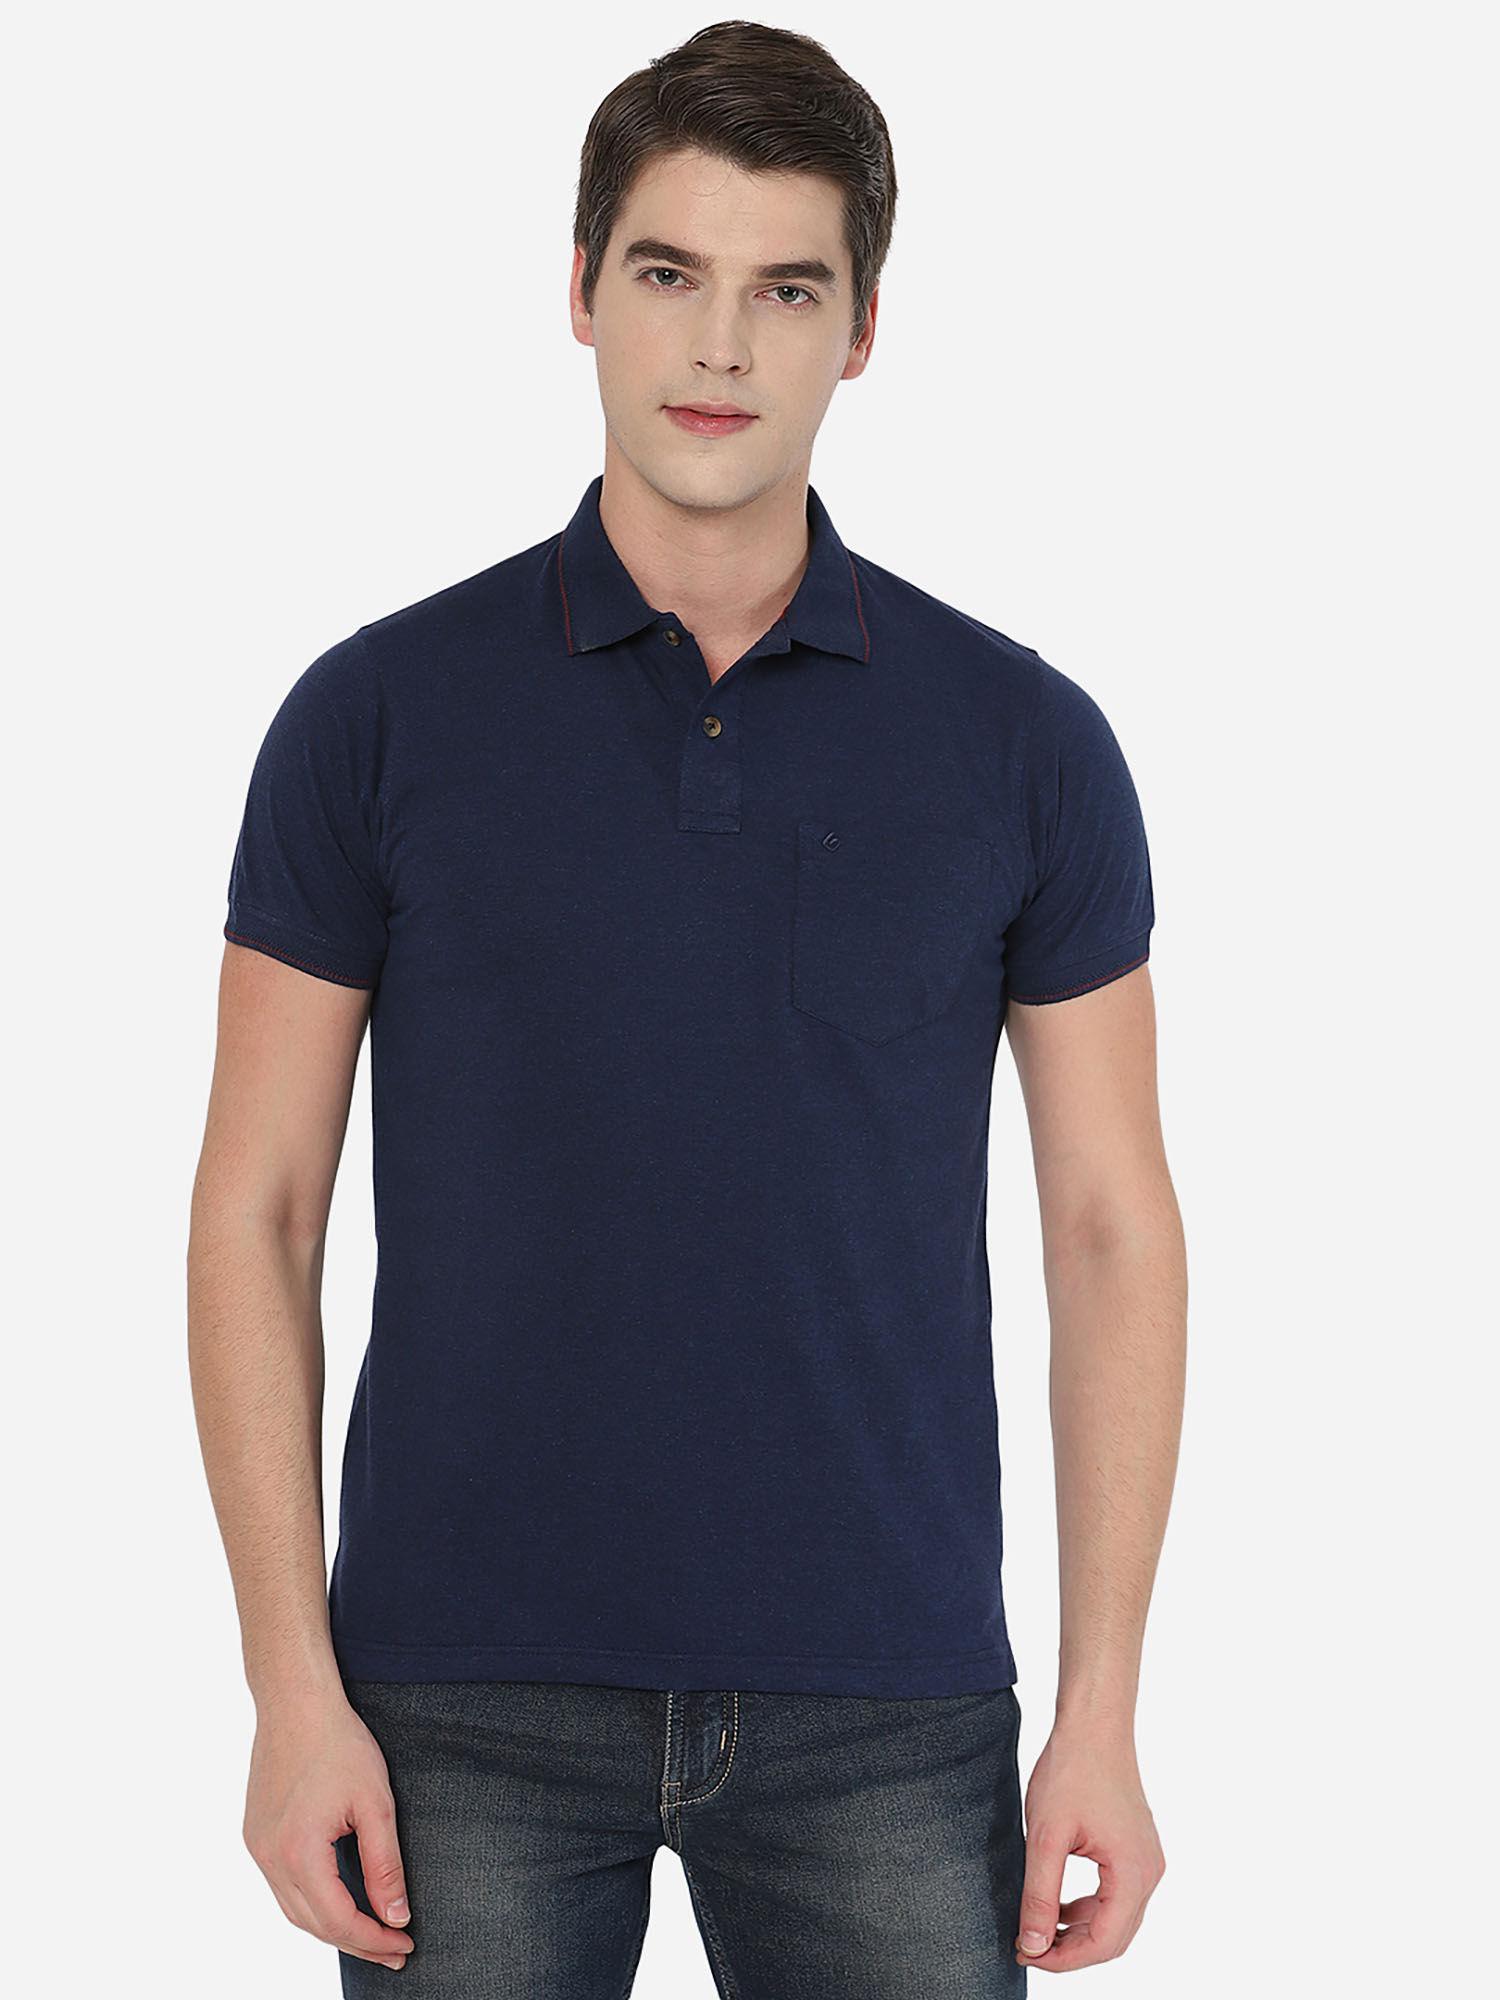 mens solid navy blue cotton blend slim fit polo t-shirt